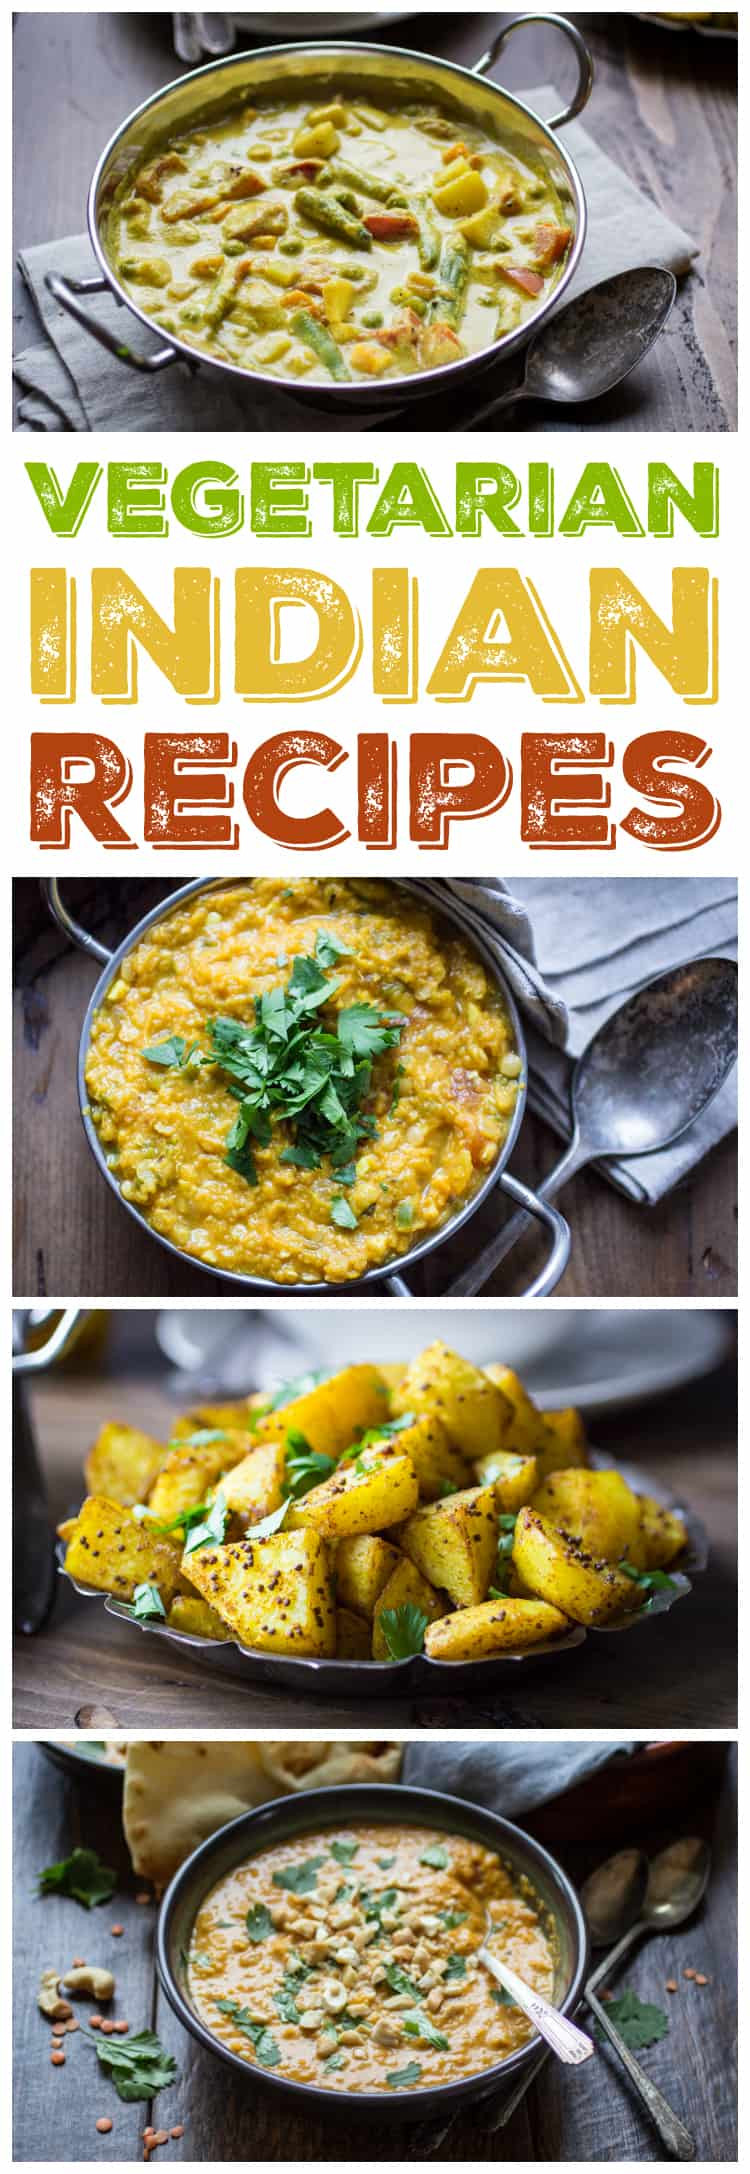 Easy Indian Vegetarian Dinner Recipes
 10 Ve arian Indian Recipes to Make Again and Again The